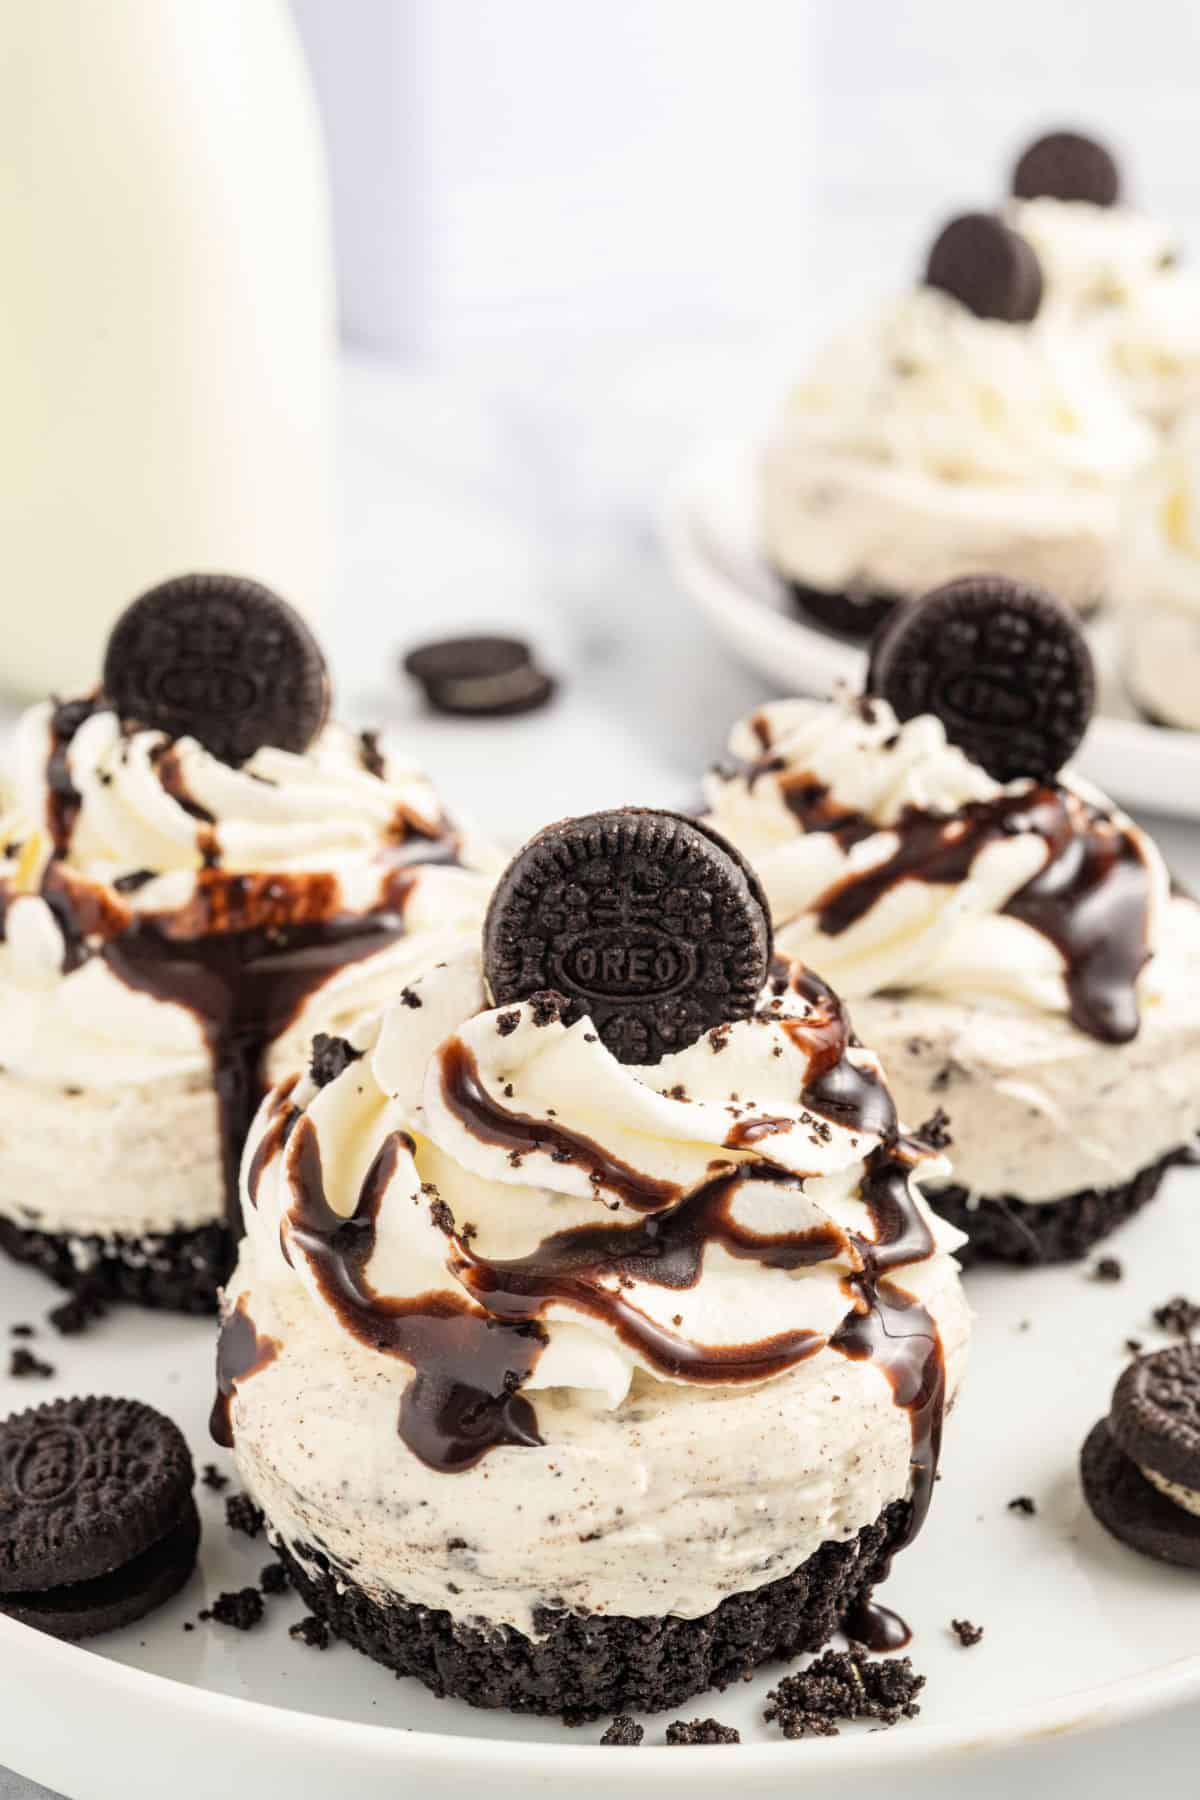 Oreo cheesecake topped with whipped cream and chocolate syrup.